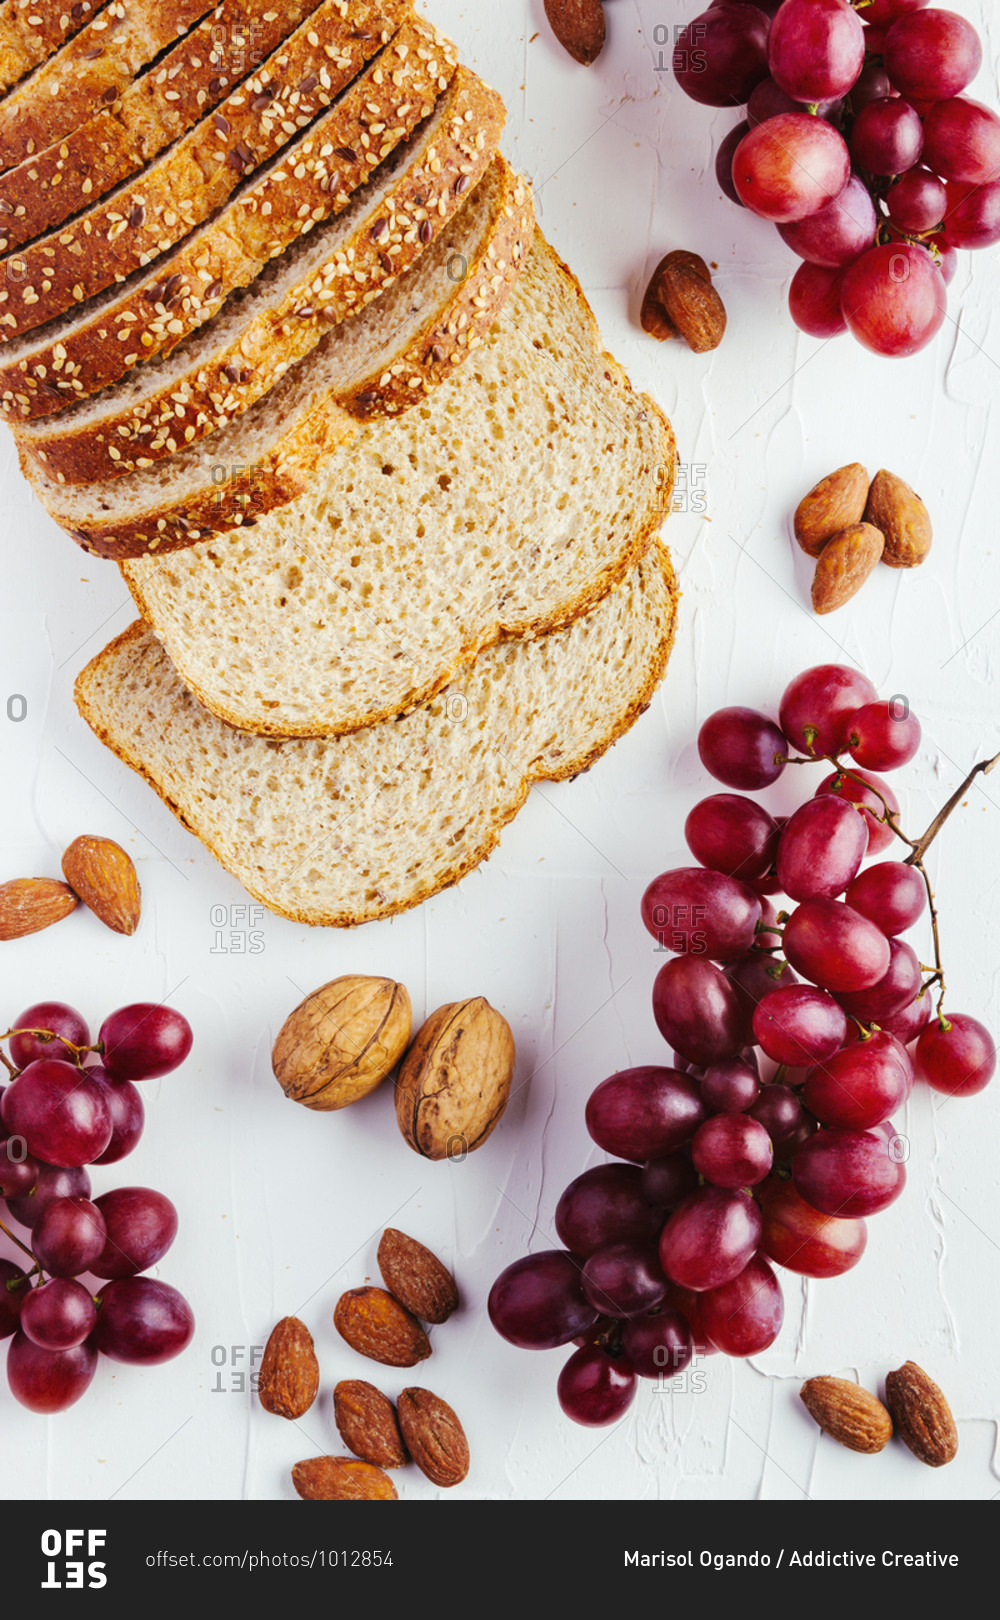 Top view composition with sliced bread and red and green grapes arranged on white table with walnuts and almonds